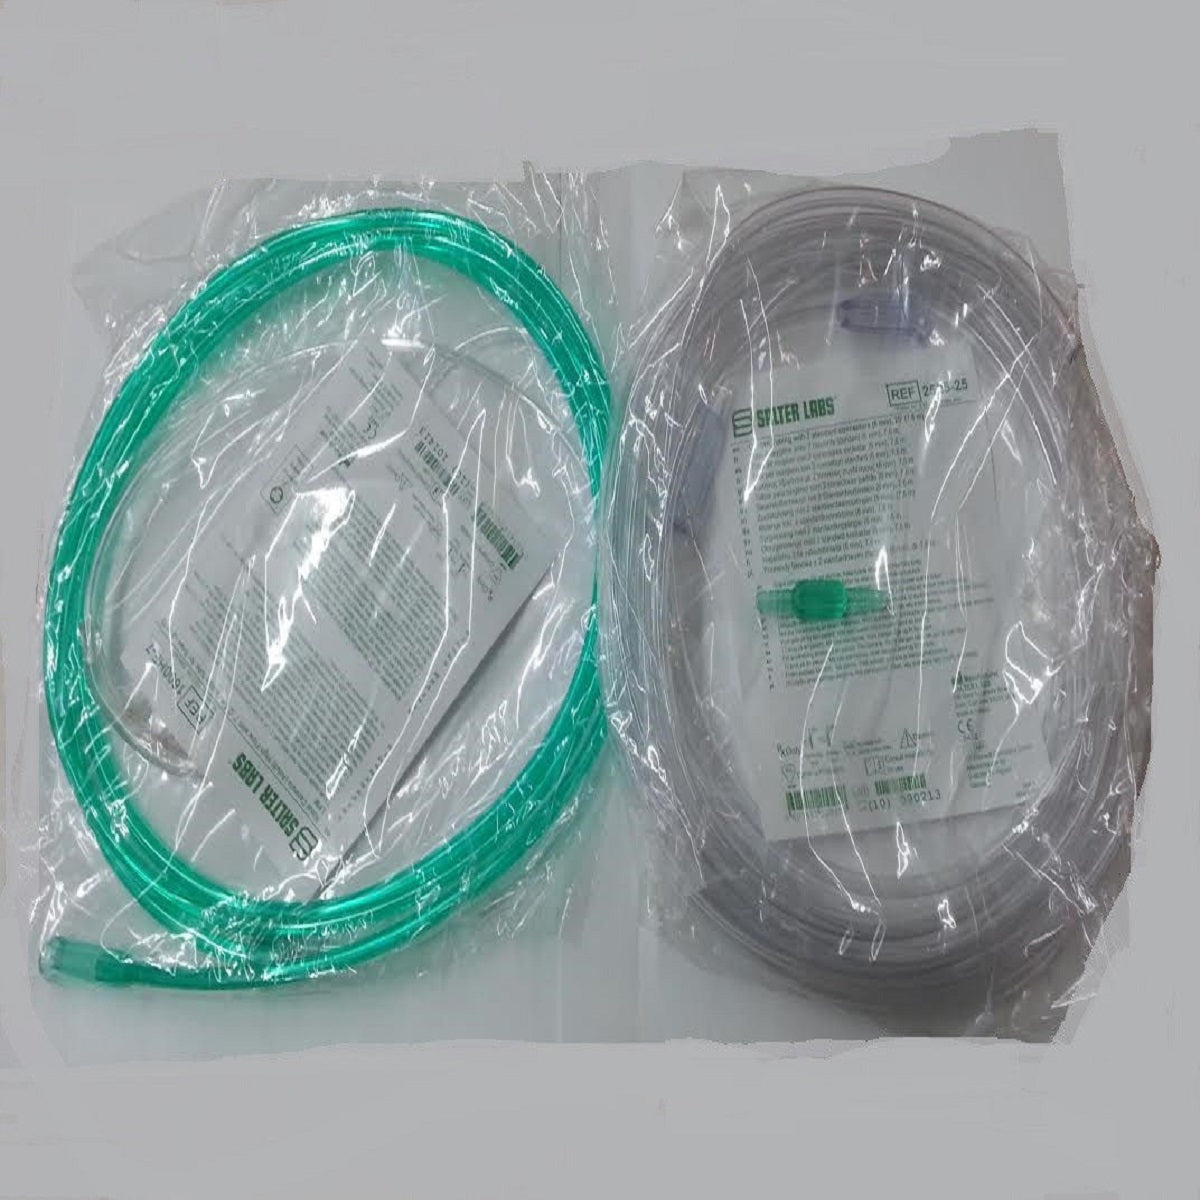 Oxygen Tubing Starter Pack. 25' Hose, 7' Cannula or Mask, and Connector!